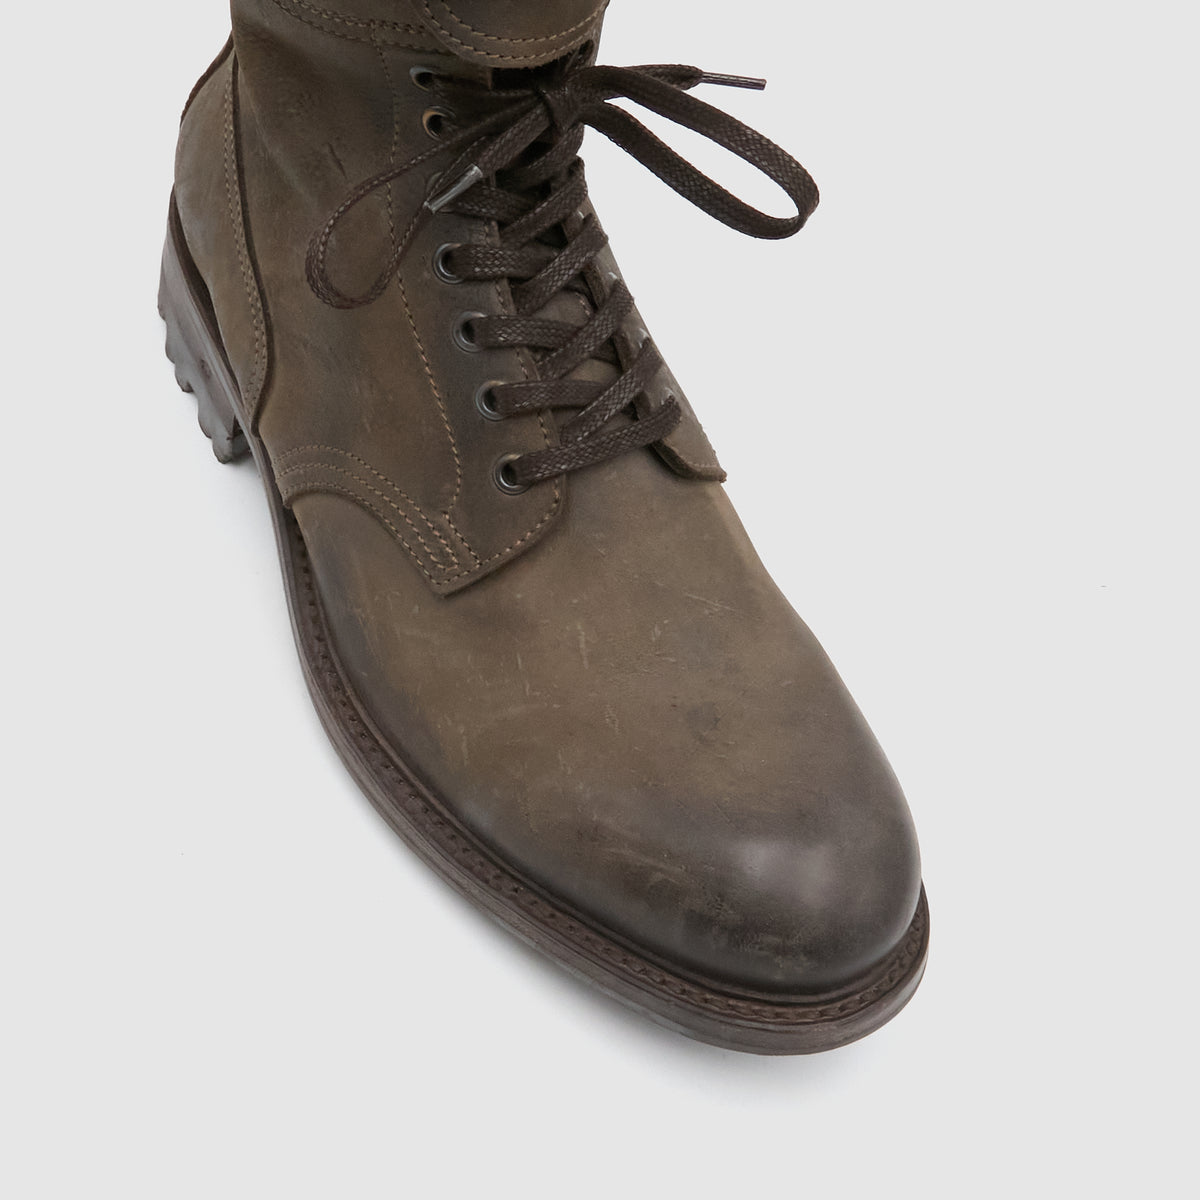 n.d.c. made by hand Waxed Kudu Leather Boots